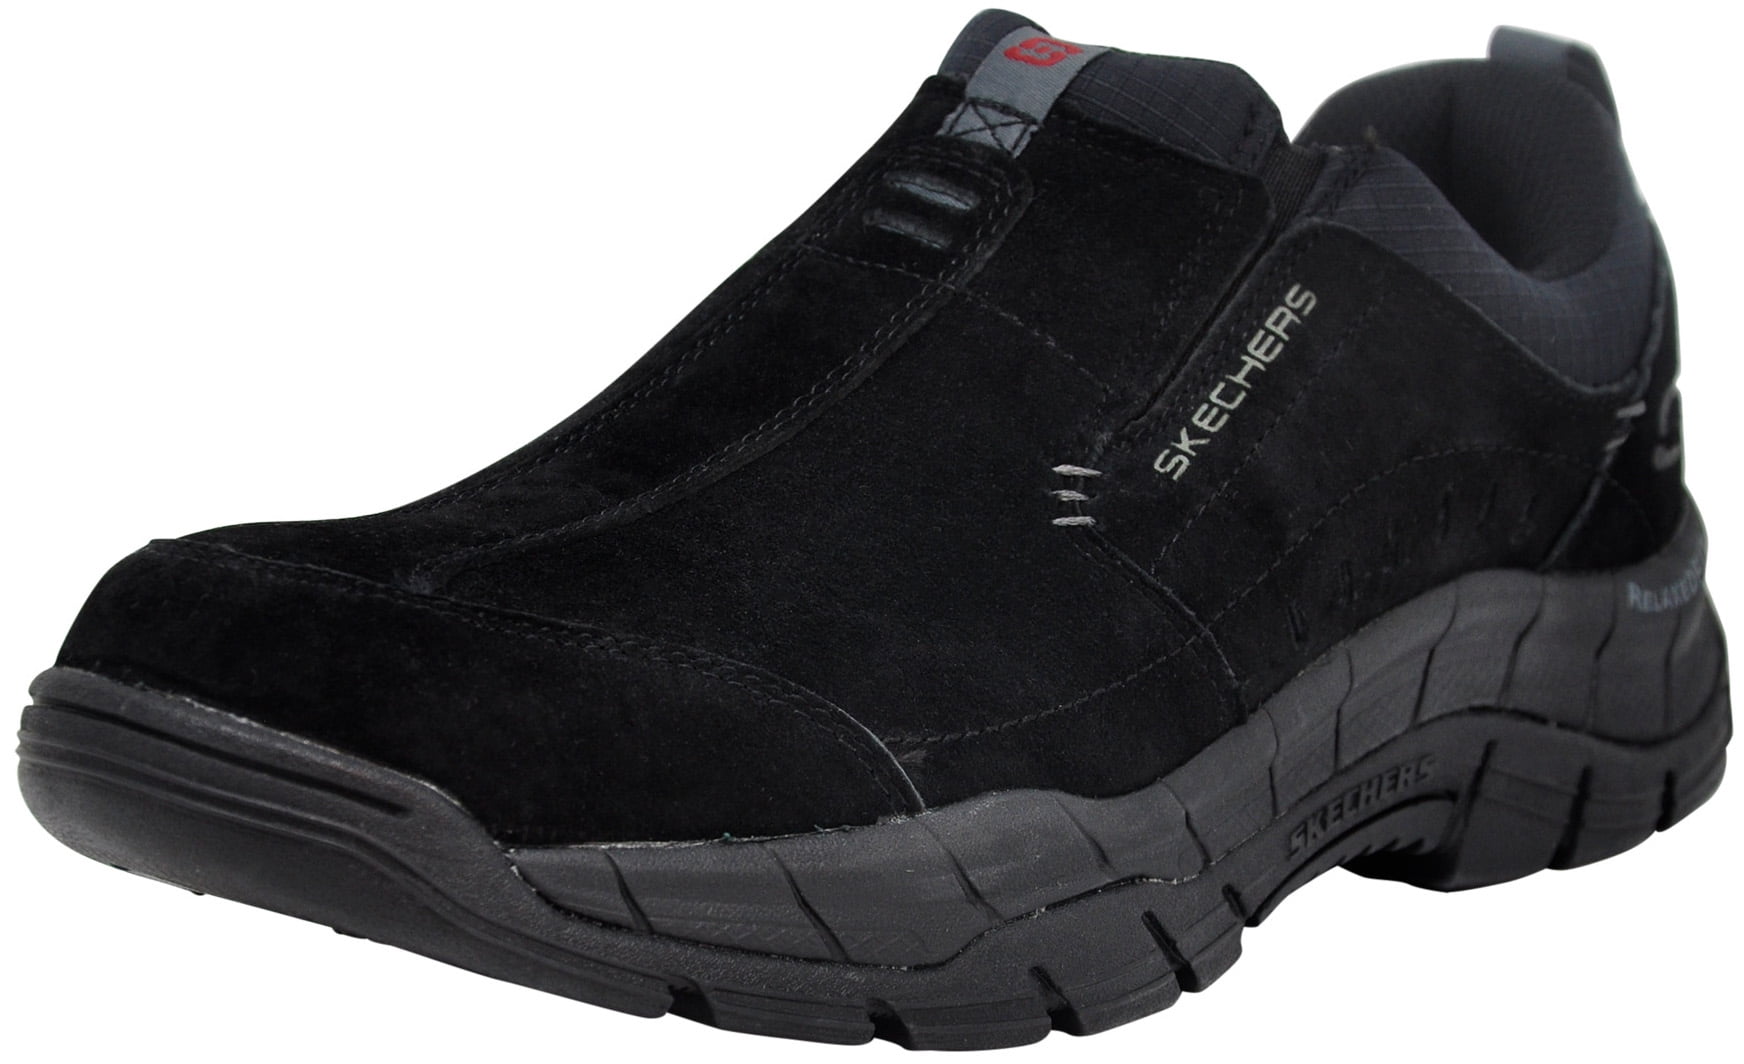 Skechers Men's Relaxed Fit Rig Mountain 